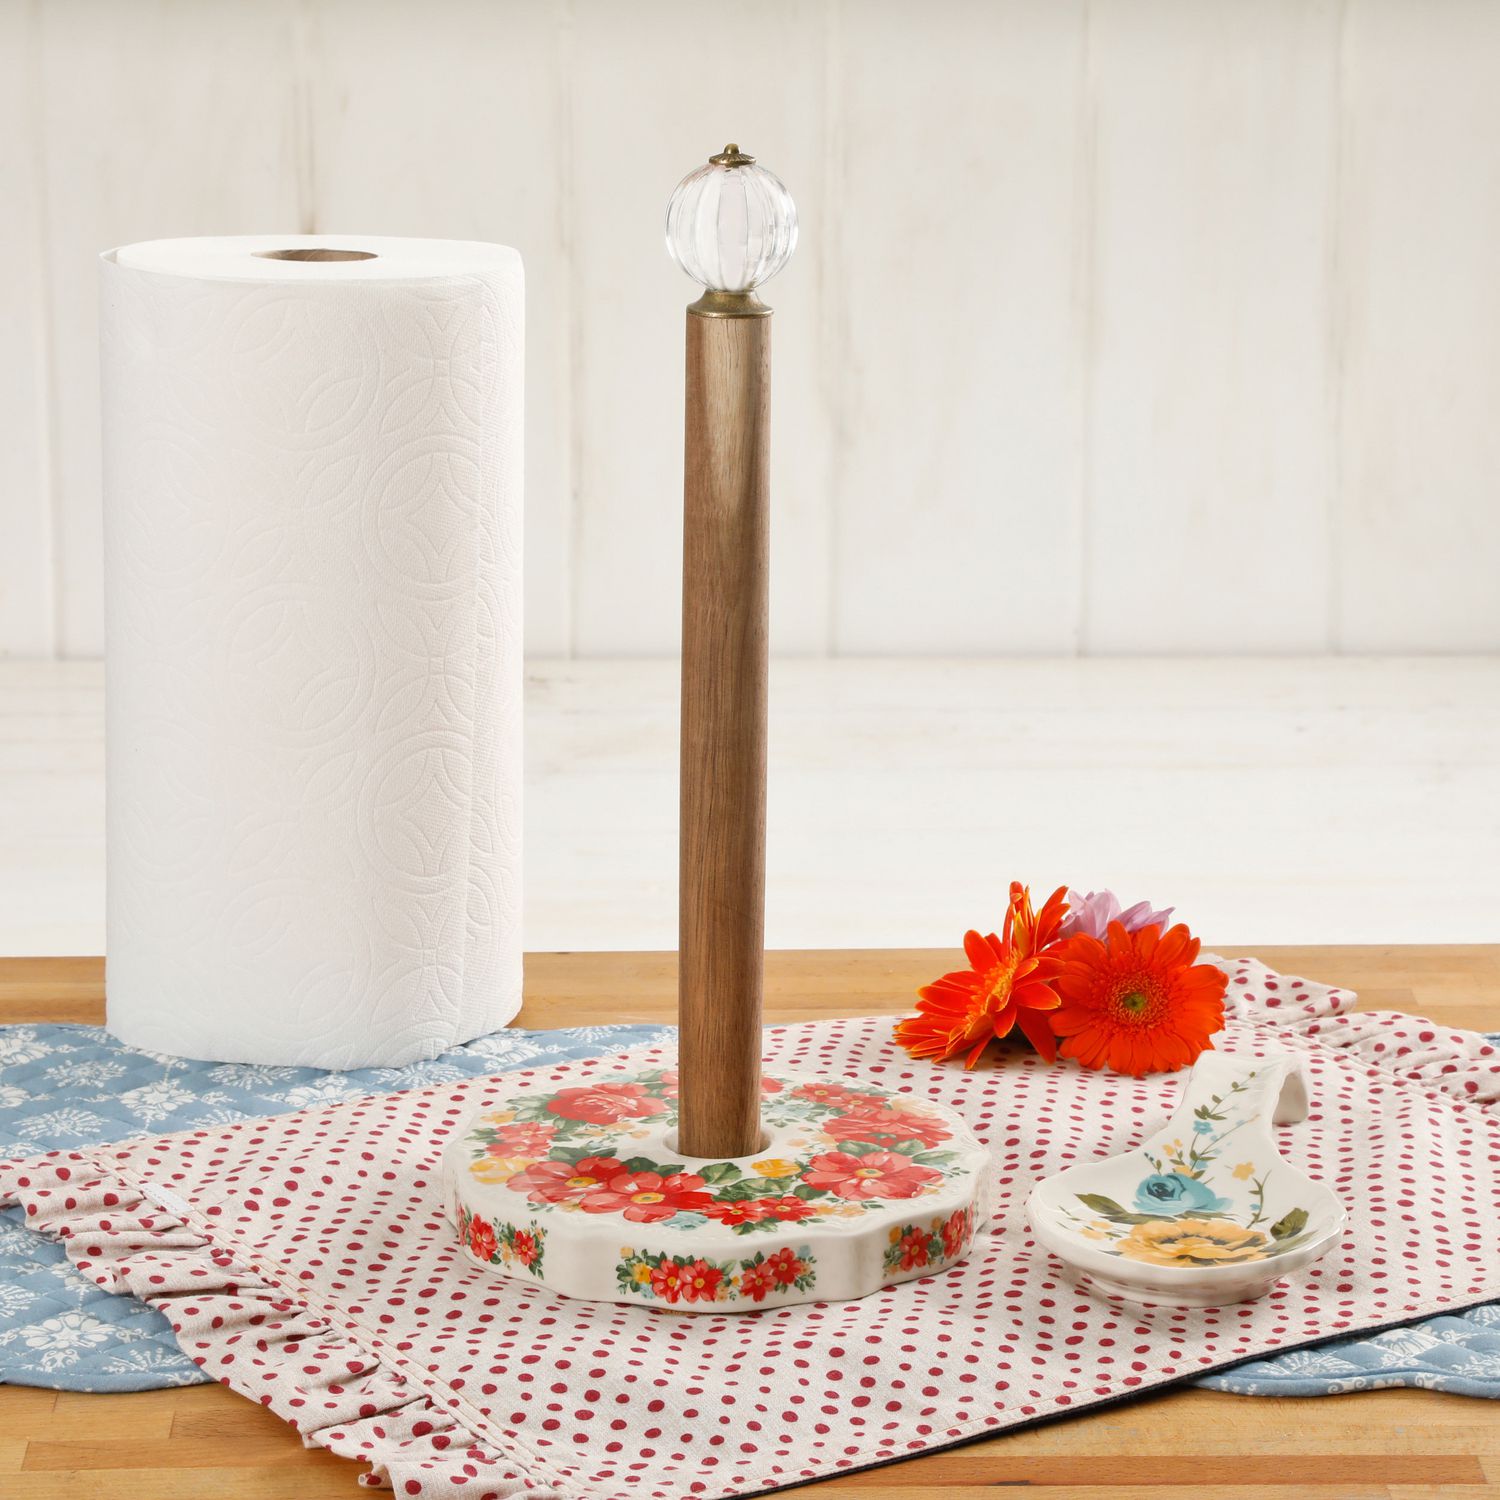 Details about    The Pioneer Woman Vintage Floral Paper Towel Holder with Rose Shadow Spoon Rest 